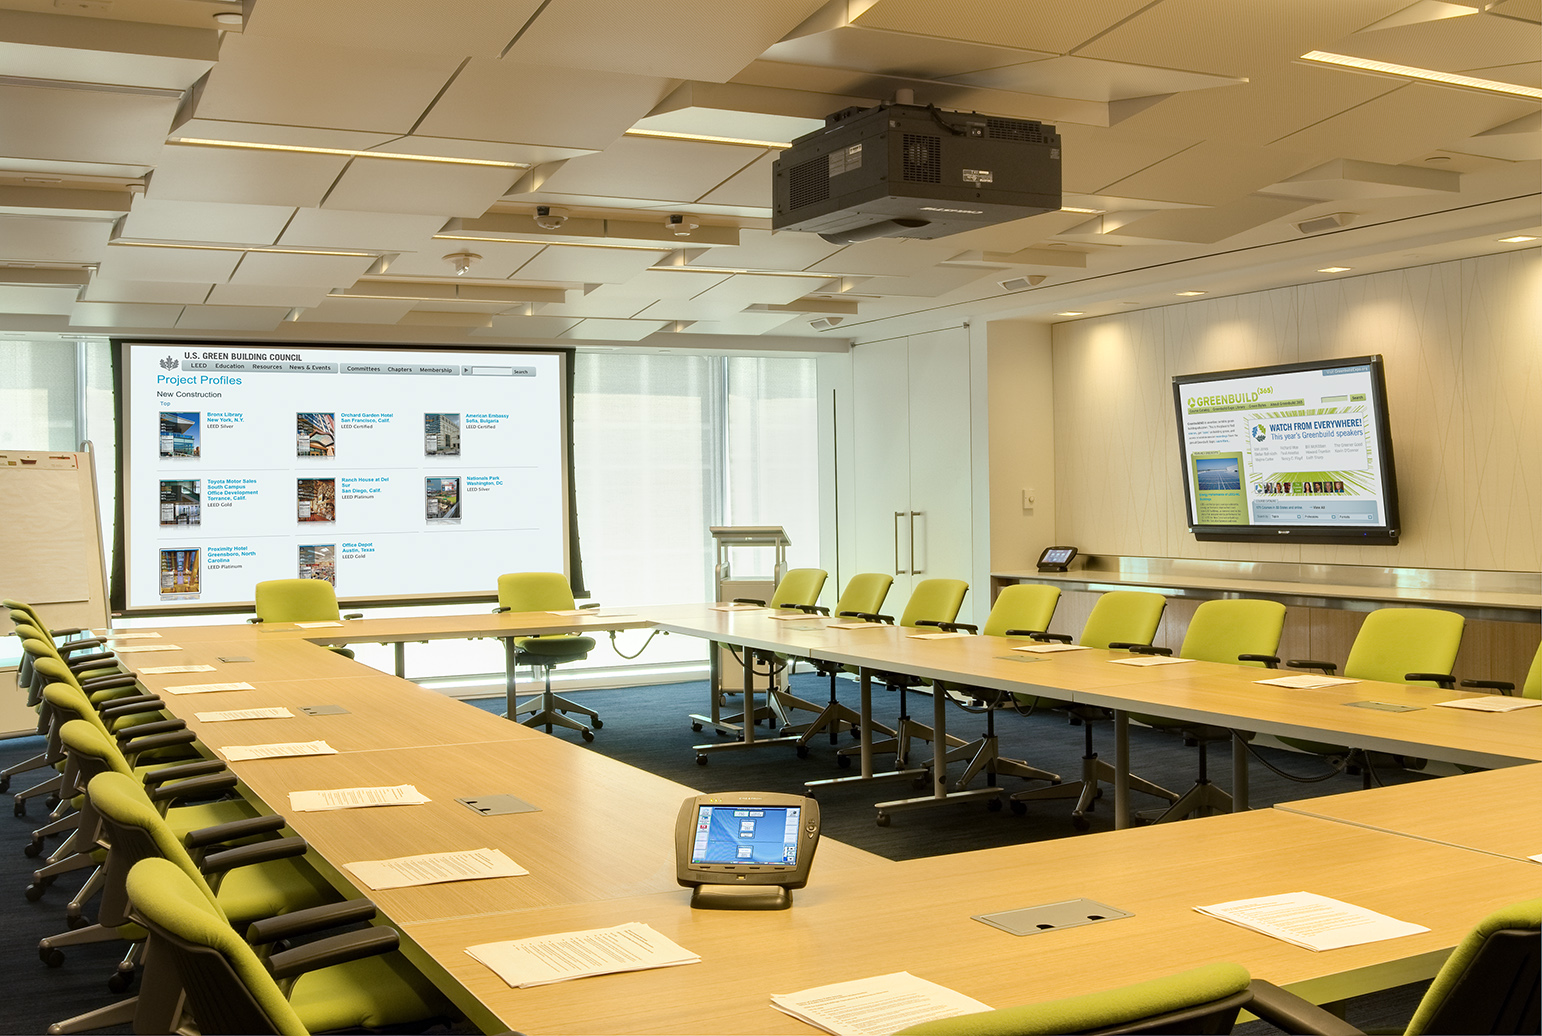 Meeting Room Audio Video and Management Systems